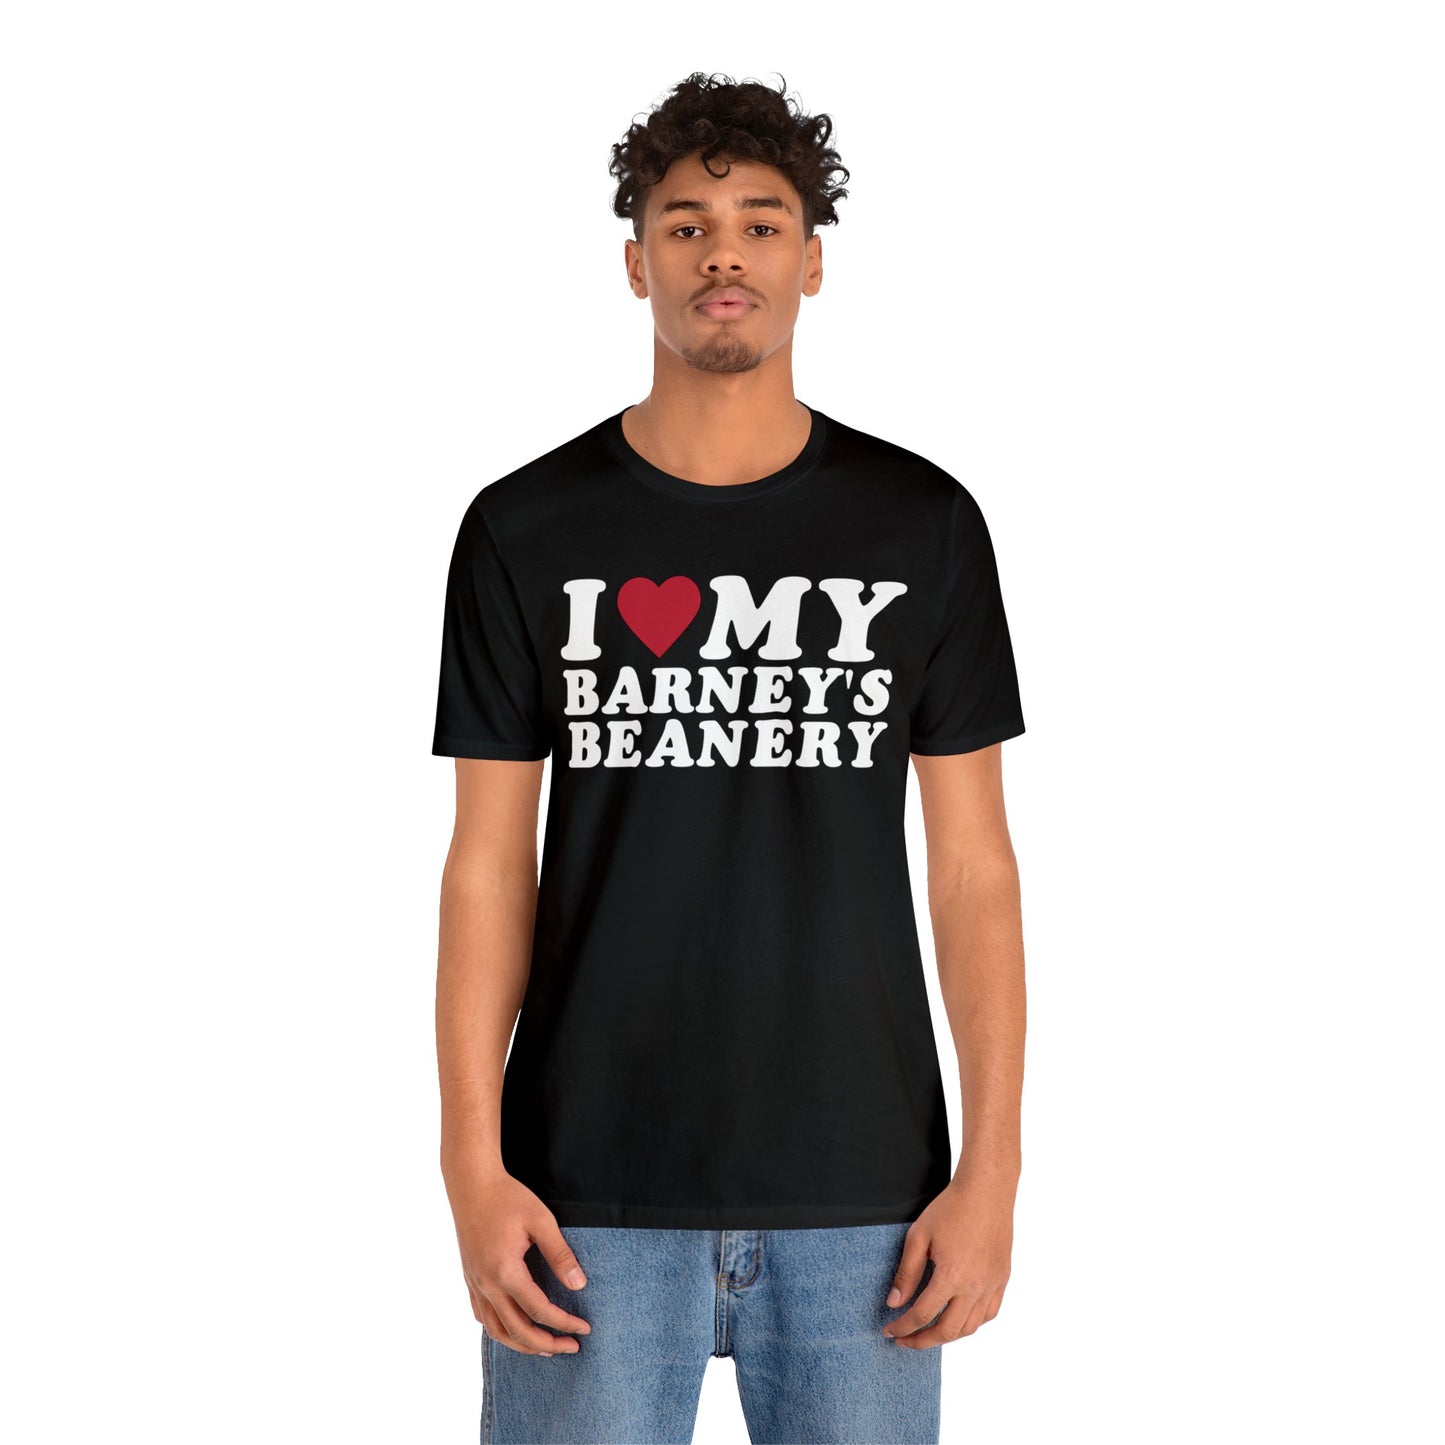 I Heart My | BARNEY'S BEANERY - Men's Graphic Tee | White And Red Graphics On Black Bella+Canvas 3001 T-Shirt, Front View Male Model